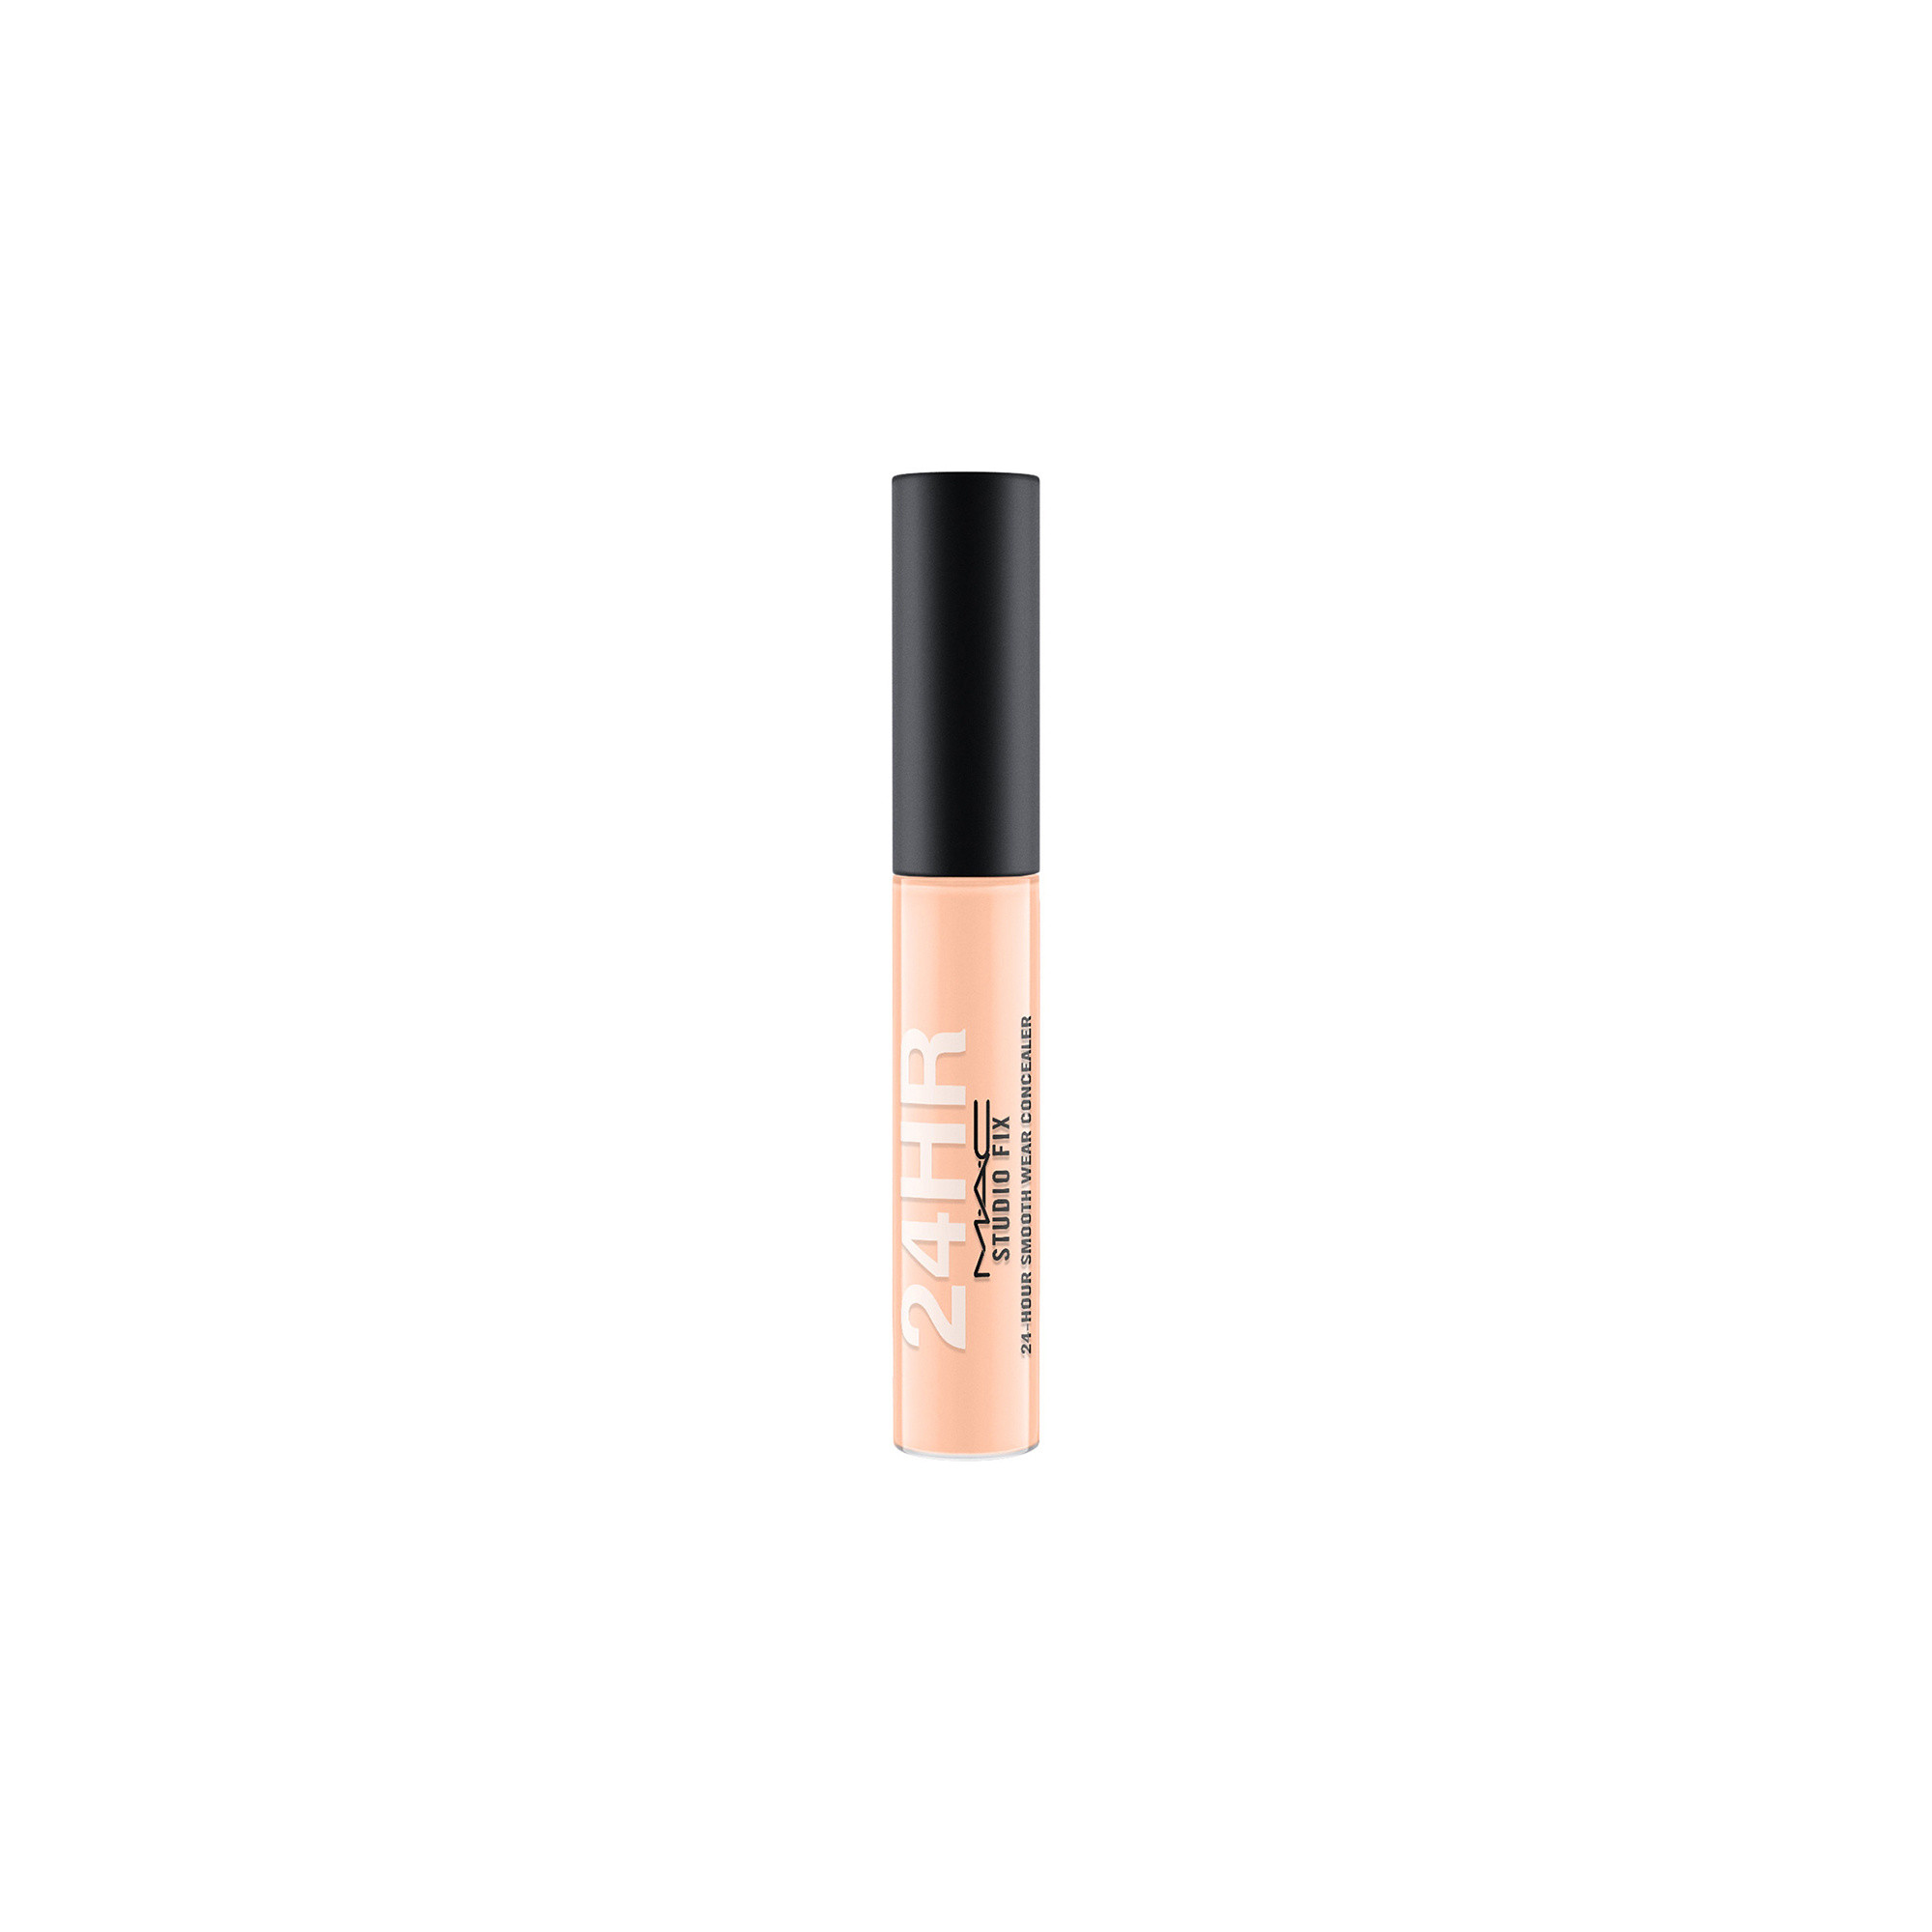 Studio Fix 24H Concealer - NW24, NW24, large image number 0